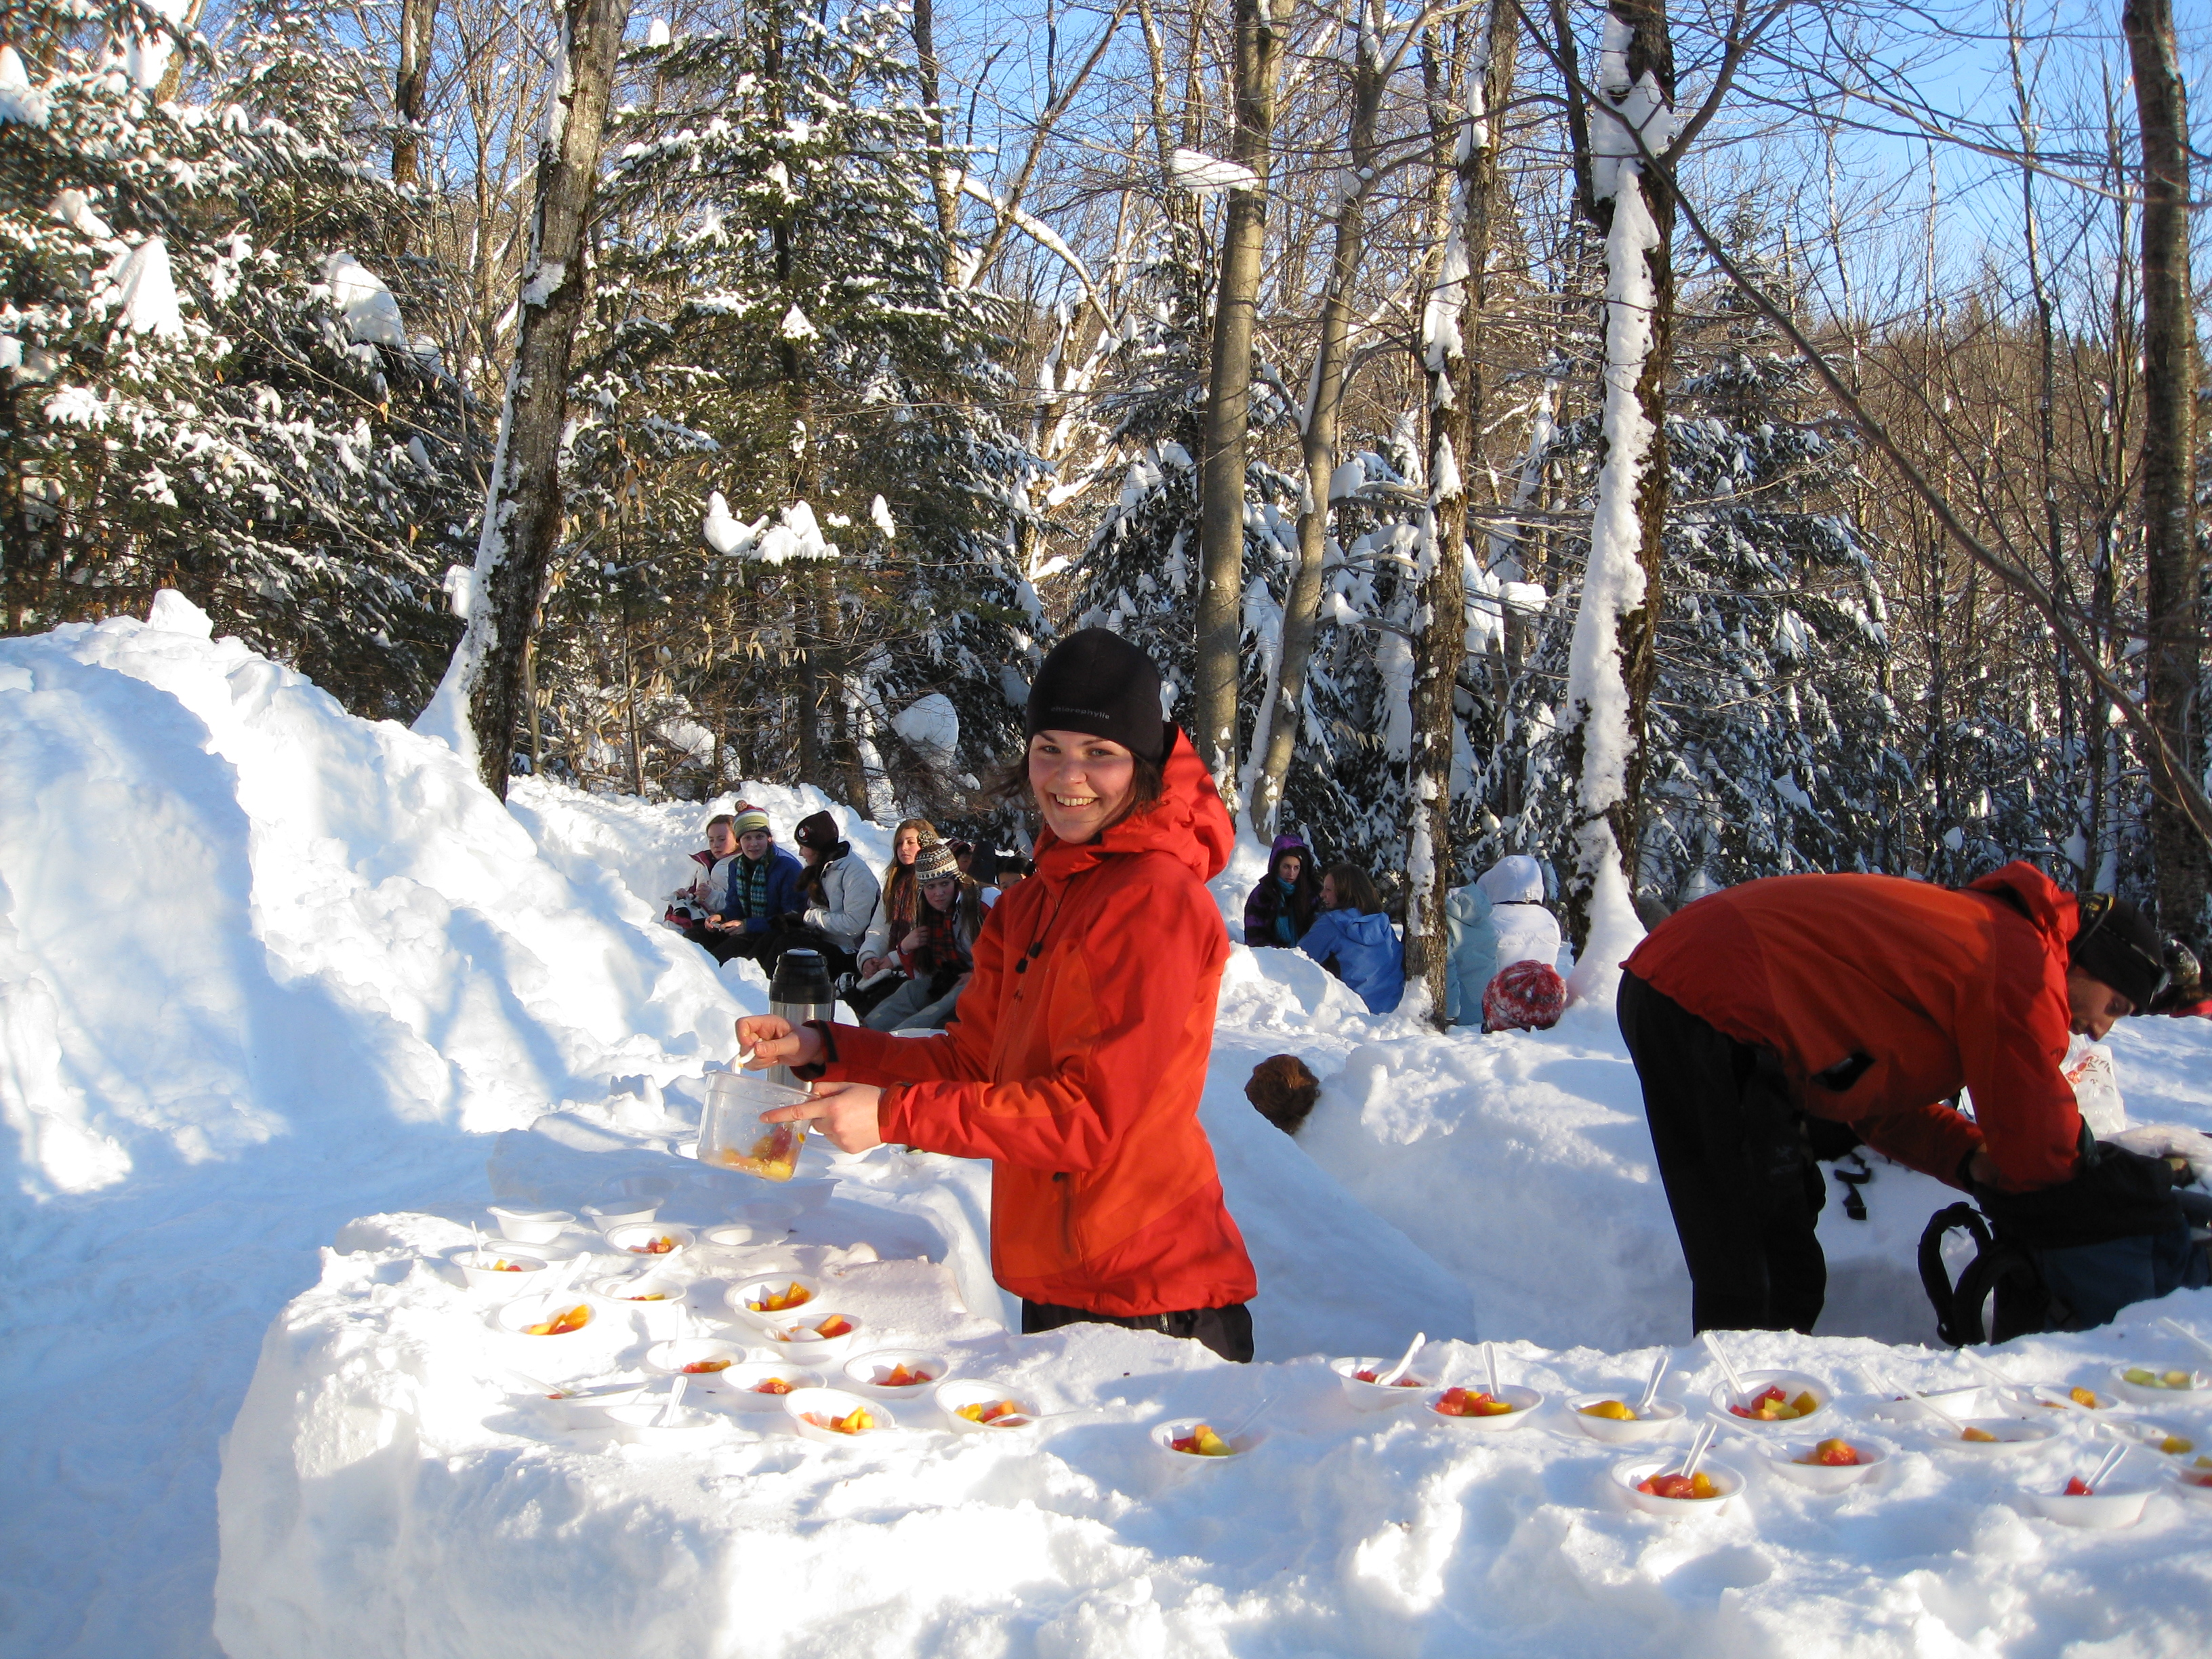 Host preparing maple taffy after the snowshoe excursion.